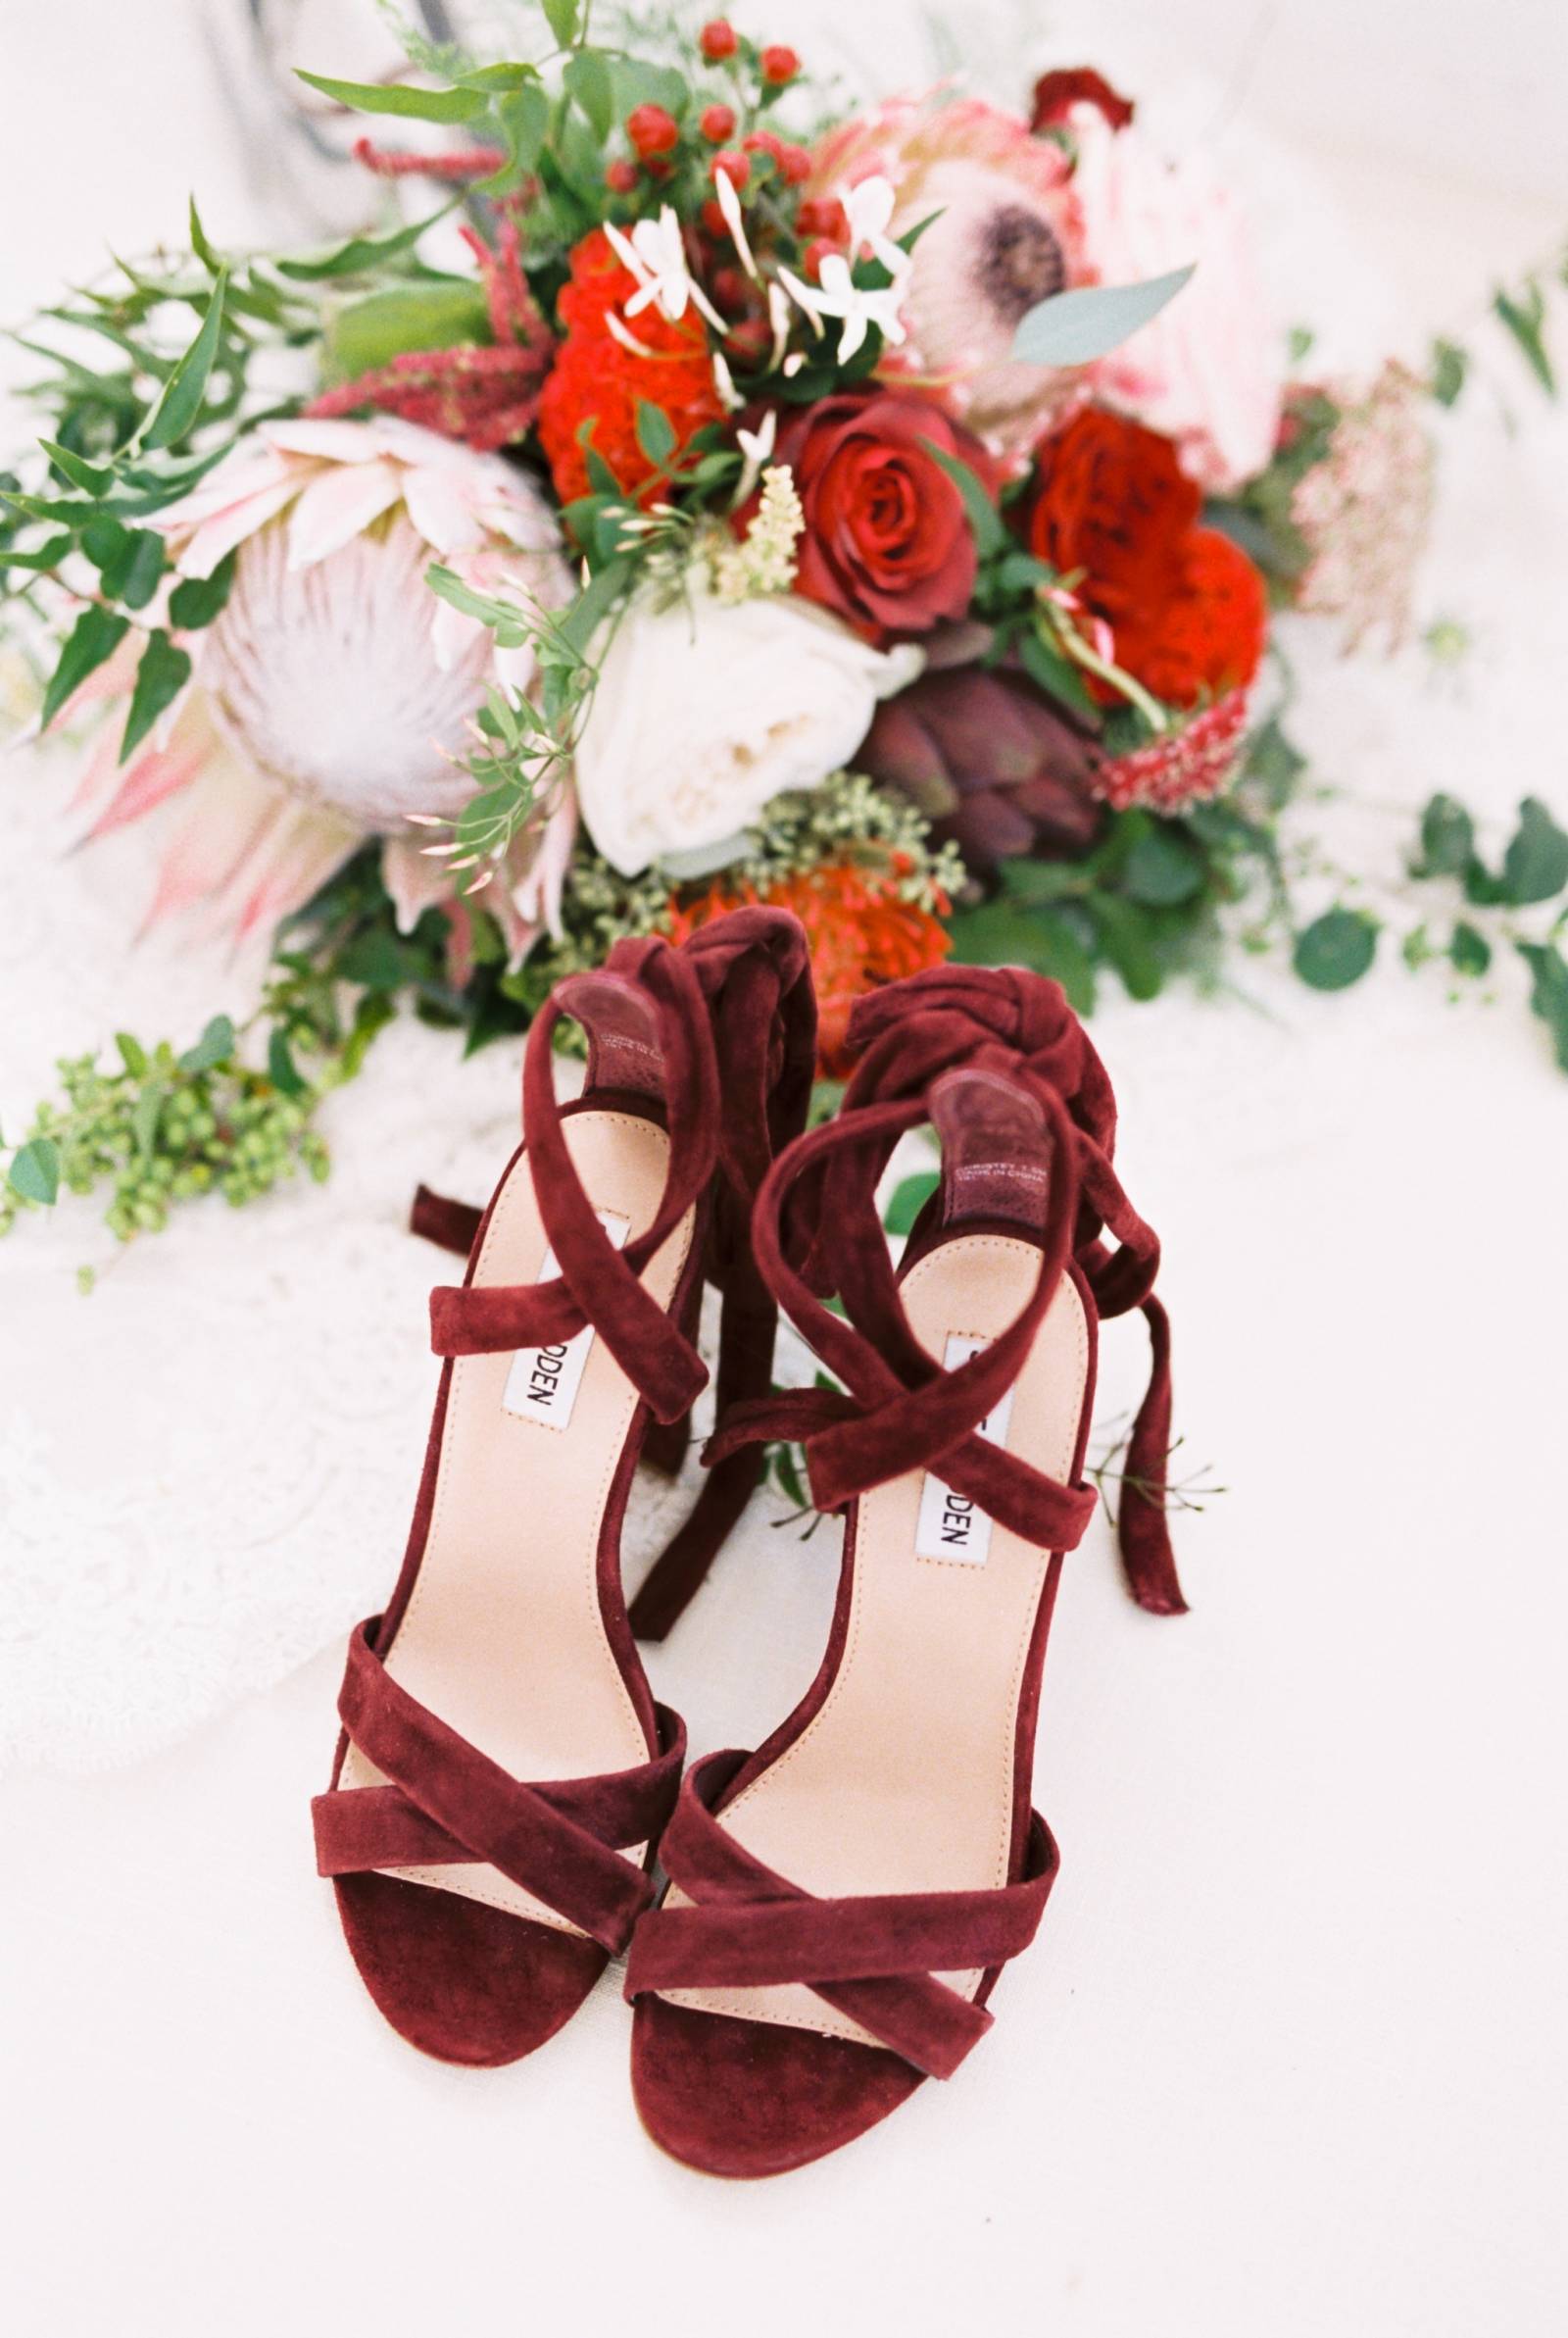 Winter Wedding in Texas with pops of pomegranate red | Texas Real Weddings